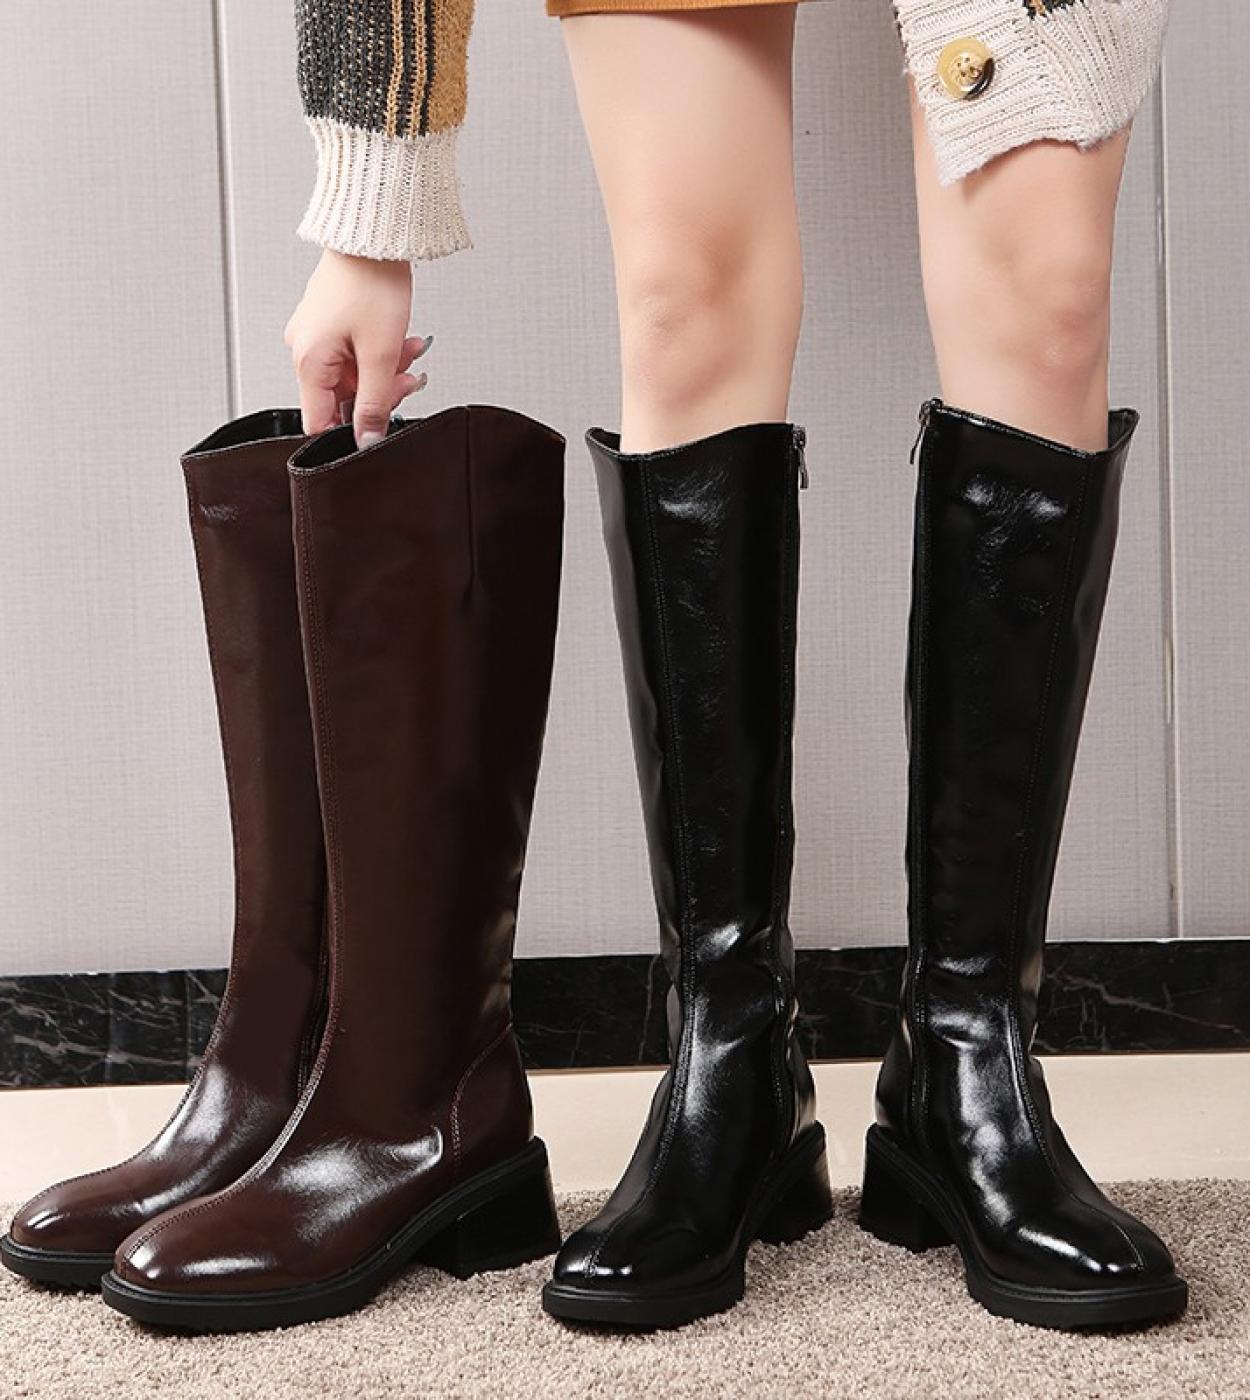 Shoe Women 2022 Designer Luxury Chelsea Boots Thigh High Knee High Fashion With Microfiber Winter Famale